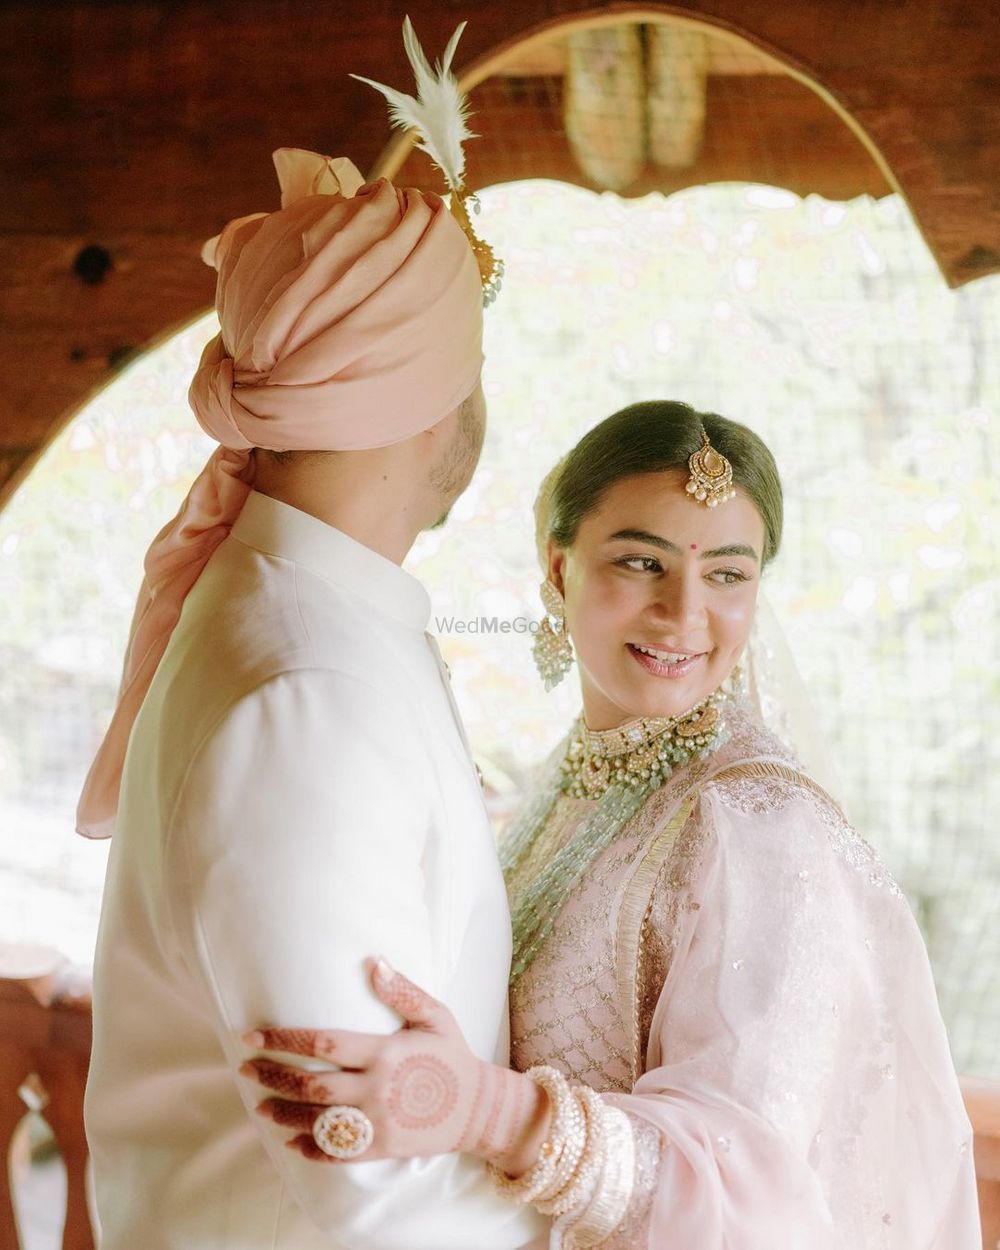 Photo From Nidhi, a bride in the hills! - By Riya Taneja Makeup